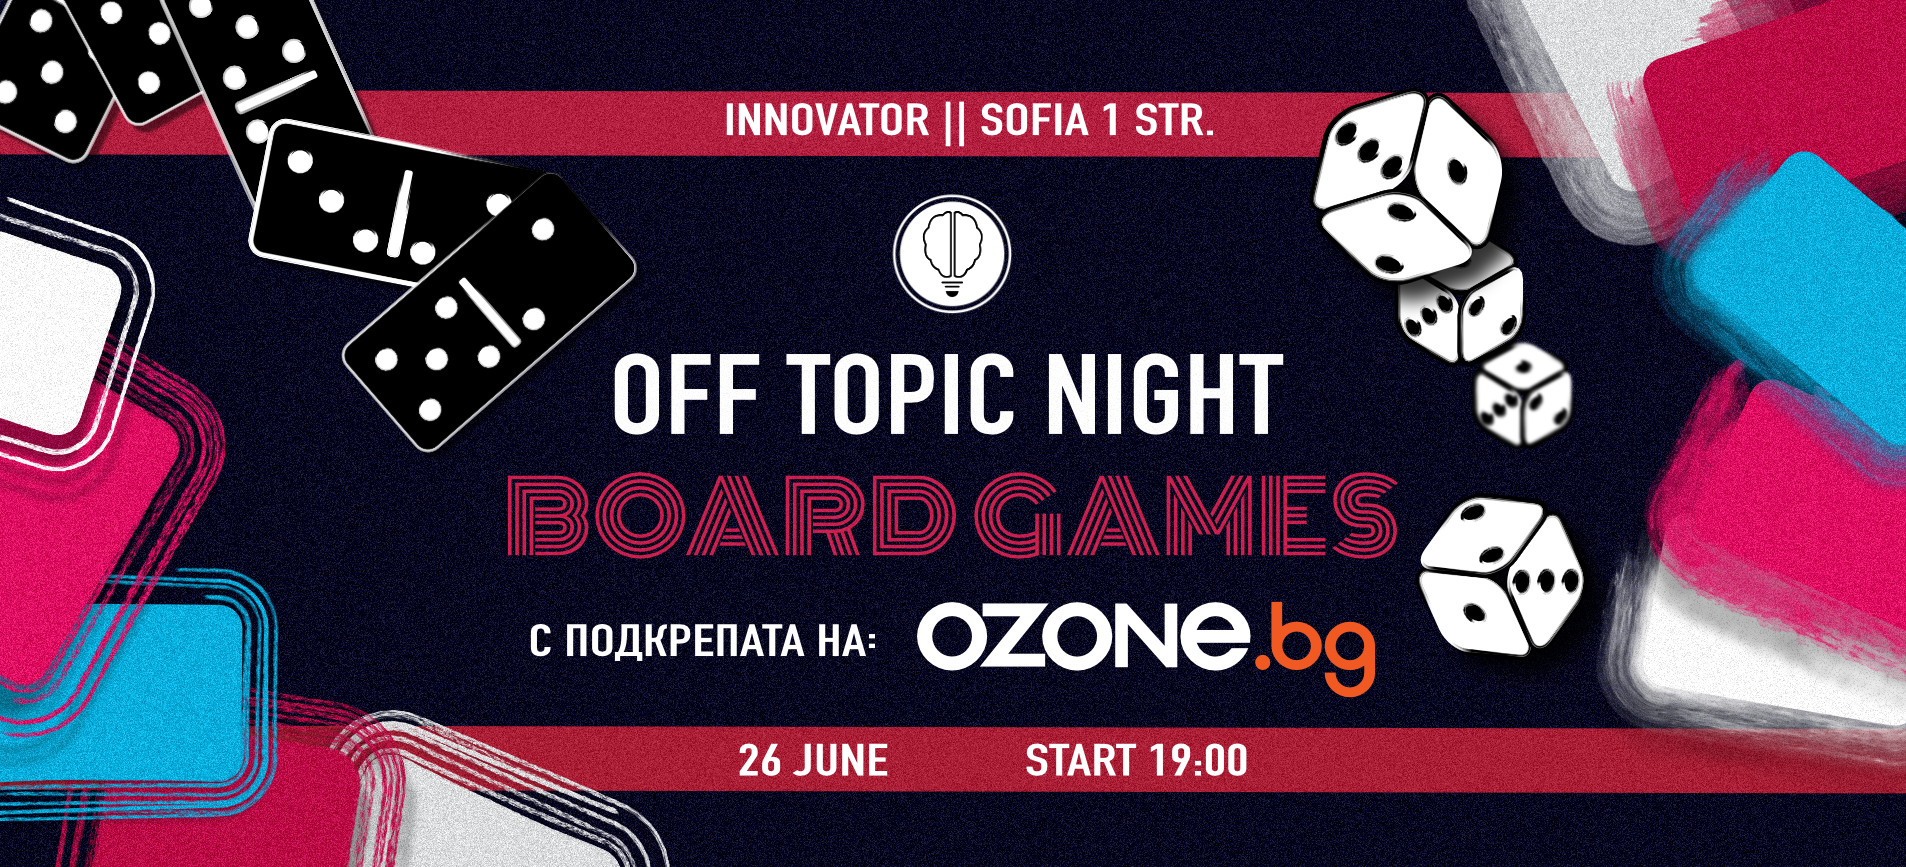 OFF Topic | Board Games Night 27 | Innovator Coworking Space